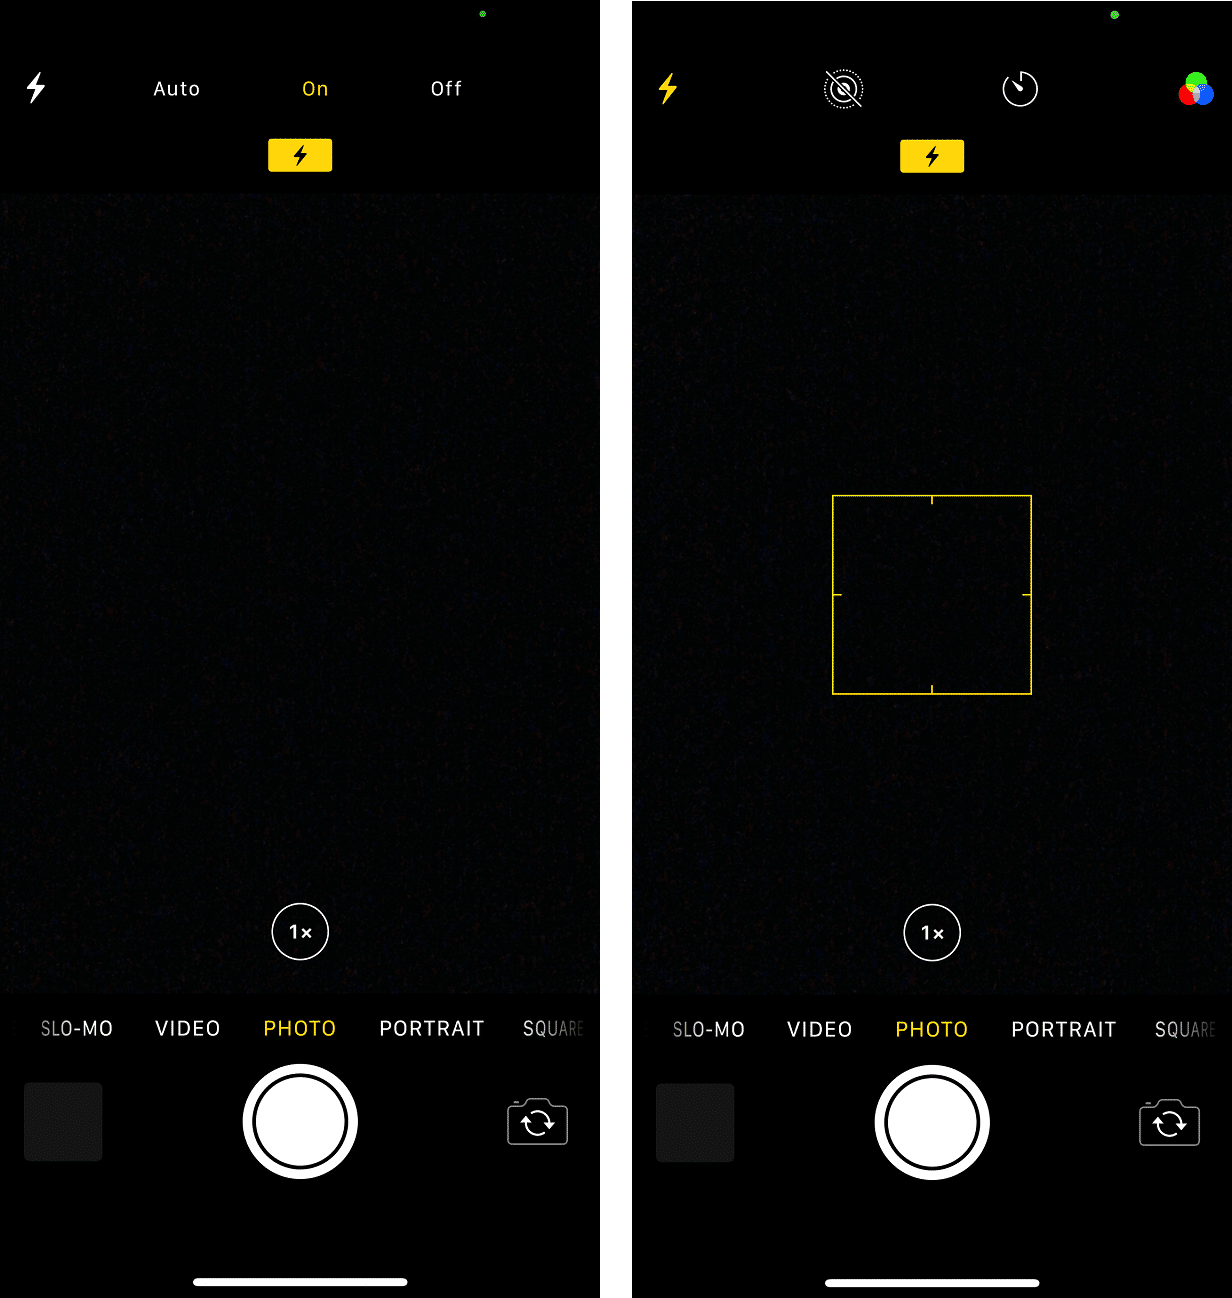 How to Turn Camera Flash ON or OFF on iPhone